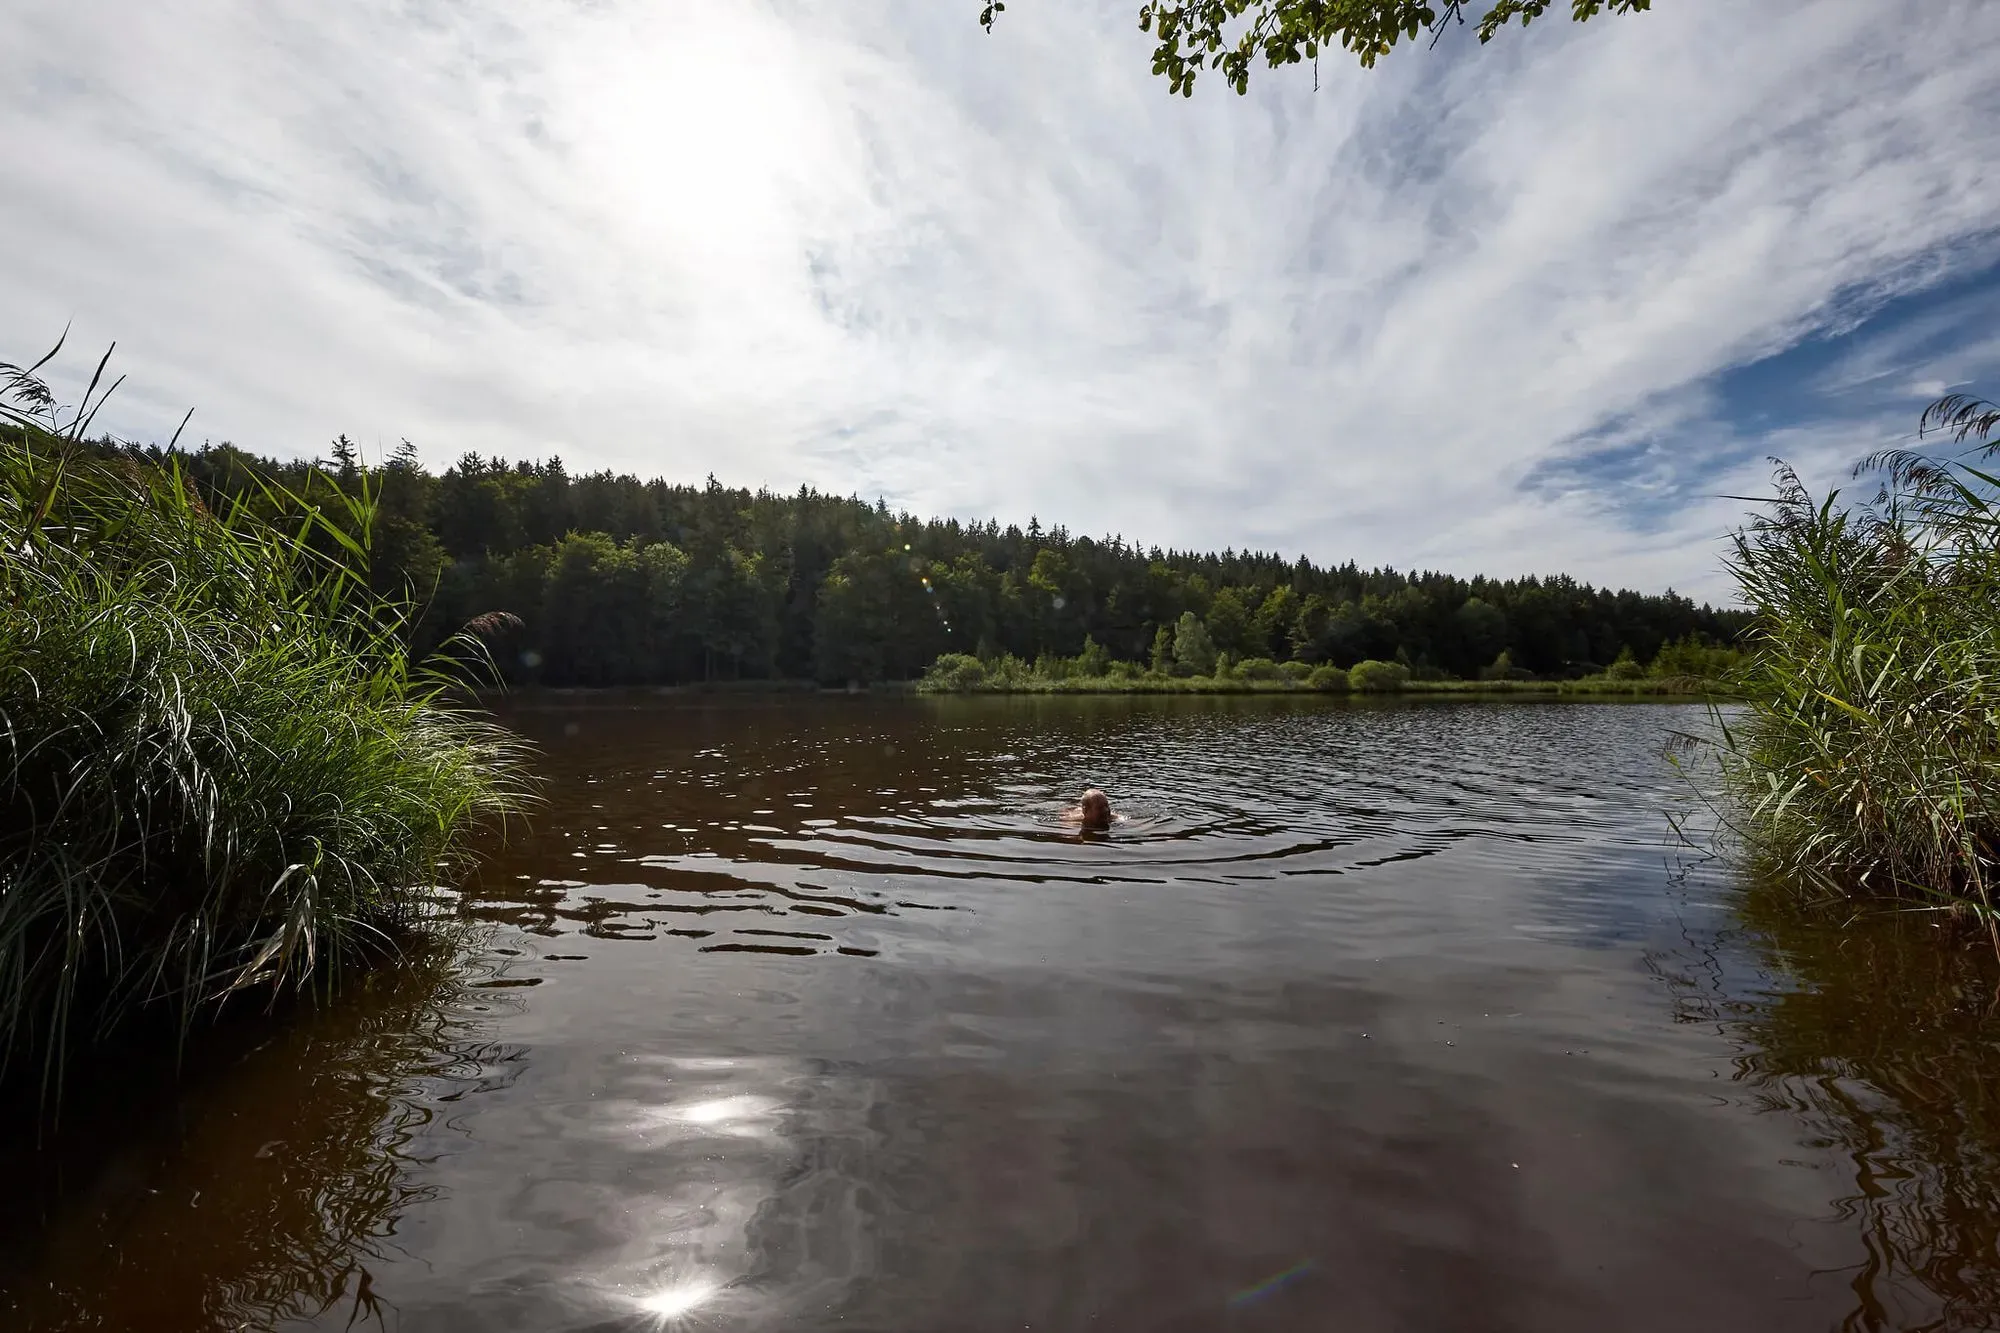 A man participating in wild swimming